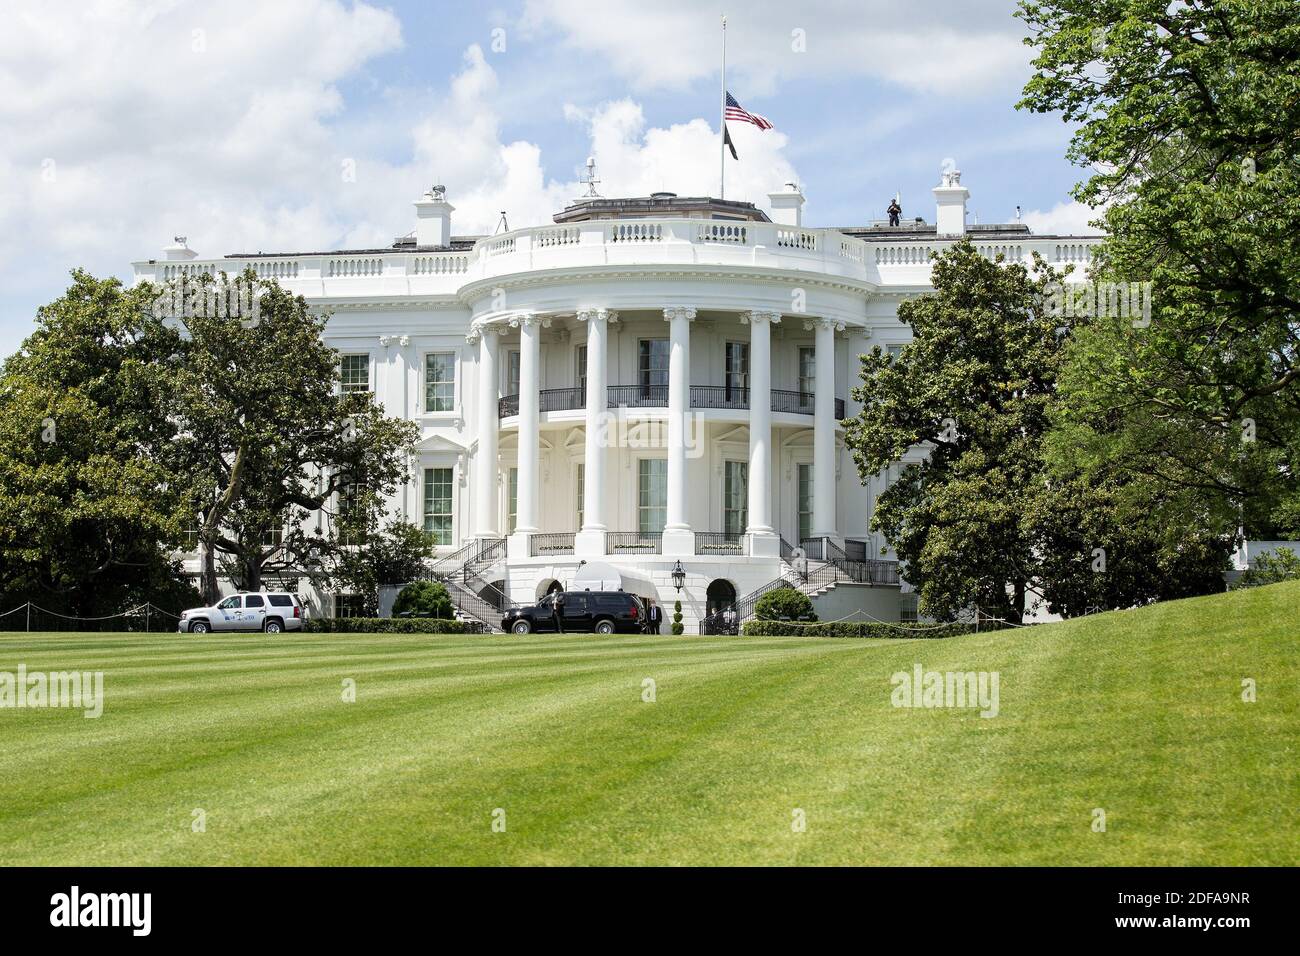 The White House is seen from the Presidential motorcade in Washington, DC, USA, as United States President Donald J. Trump returns from the Trump National Golf Club in Sterling, Virginia on Saturday, May 23, 2020. Photo by Stefani Reynolds/CNP/ABACAPRESS.COM Stock Photo